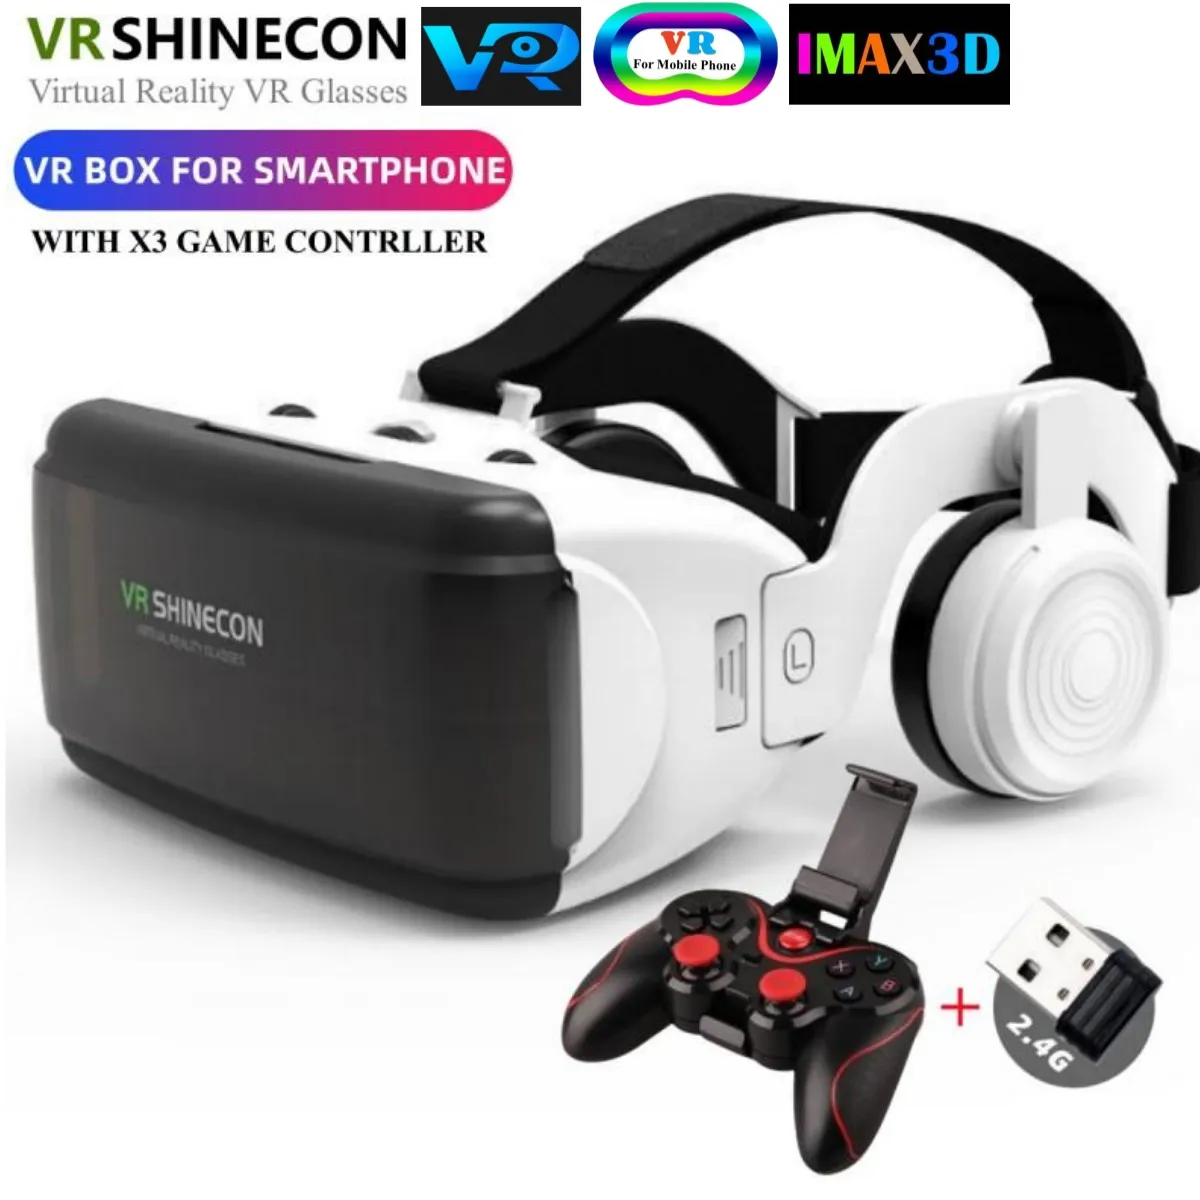 

G06E Virtual Reality VR Glasses 3D Glasses Google Cardboard Box Headset Helmet for IOS Android Smartphone with Wireless GamePad